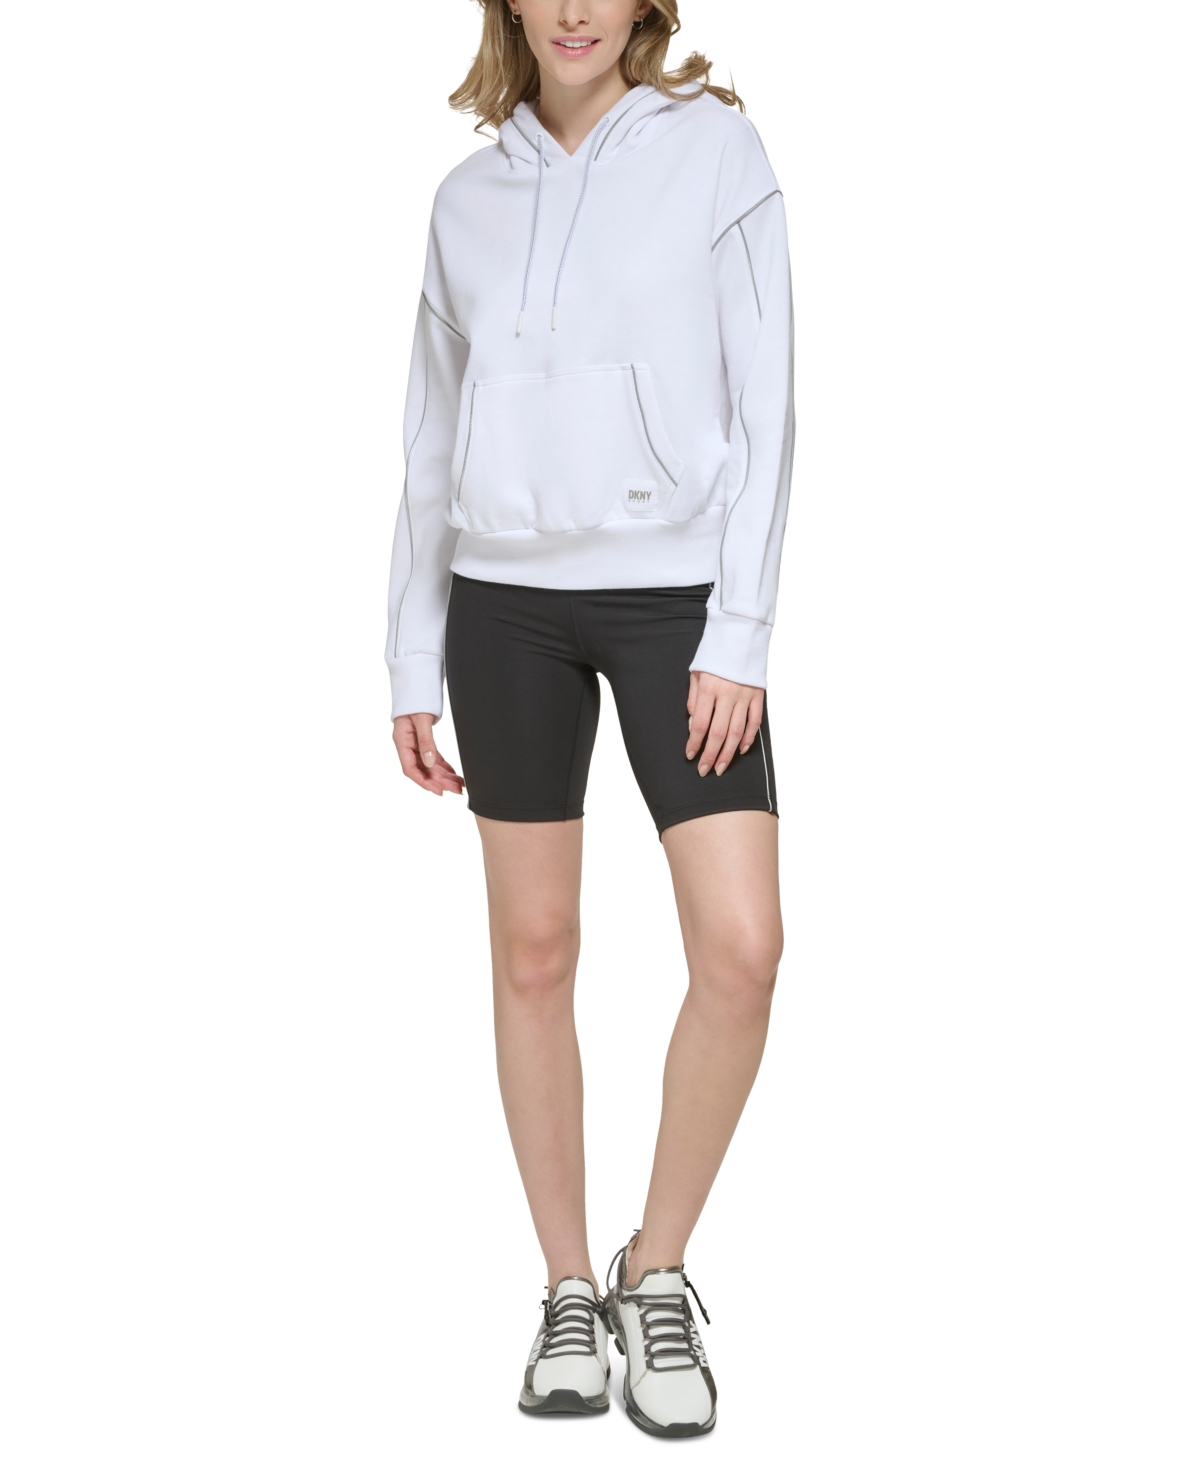  Dkny Sport Women's Reflective Piping Hoodie